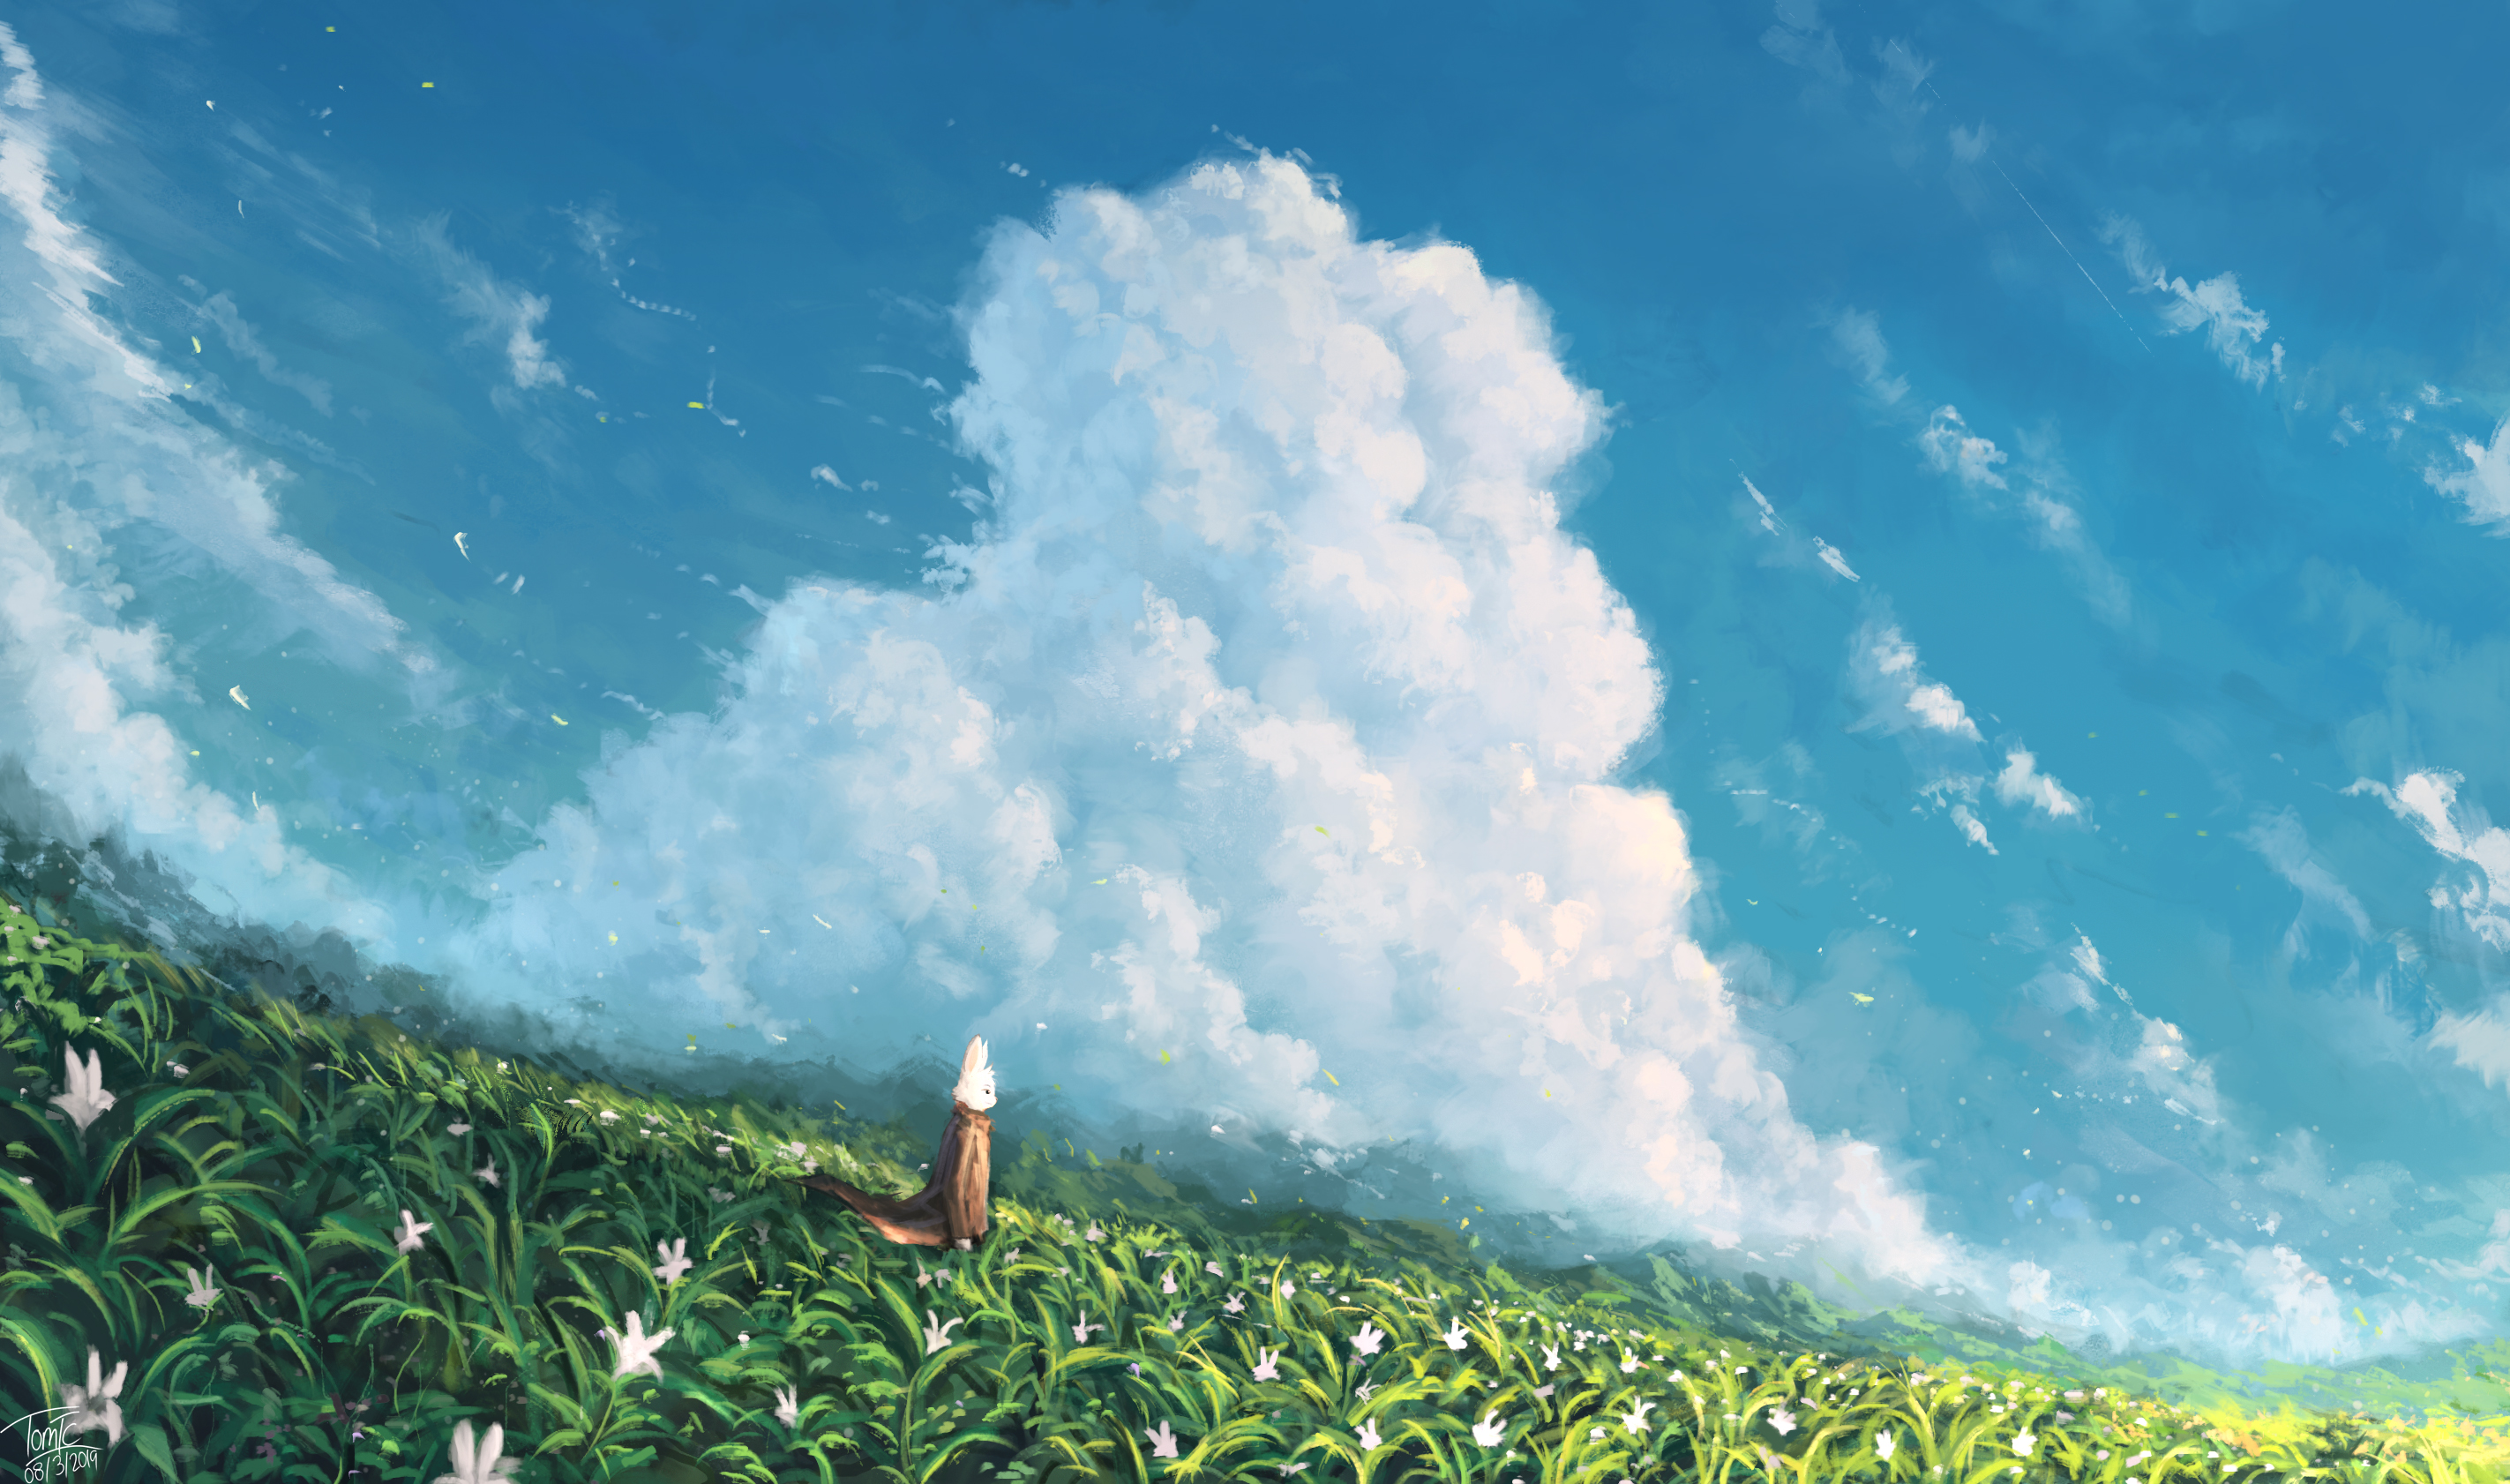 Tommy Chandra Rabbits Clouds Sky Pasture Grass Flowers Hills White Rabbit 2845x1682